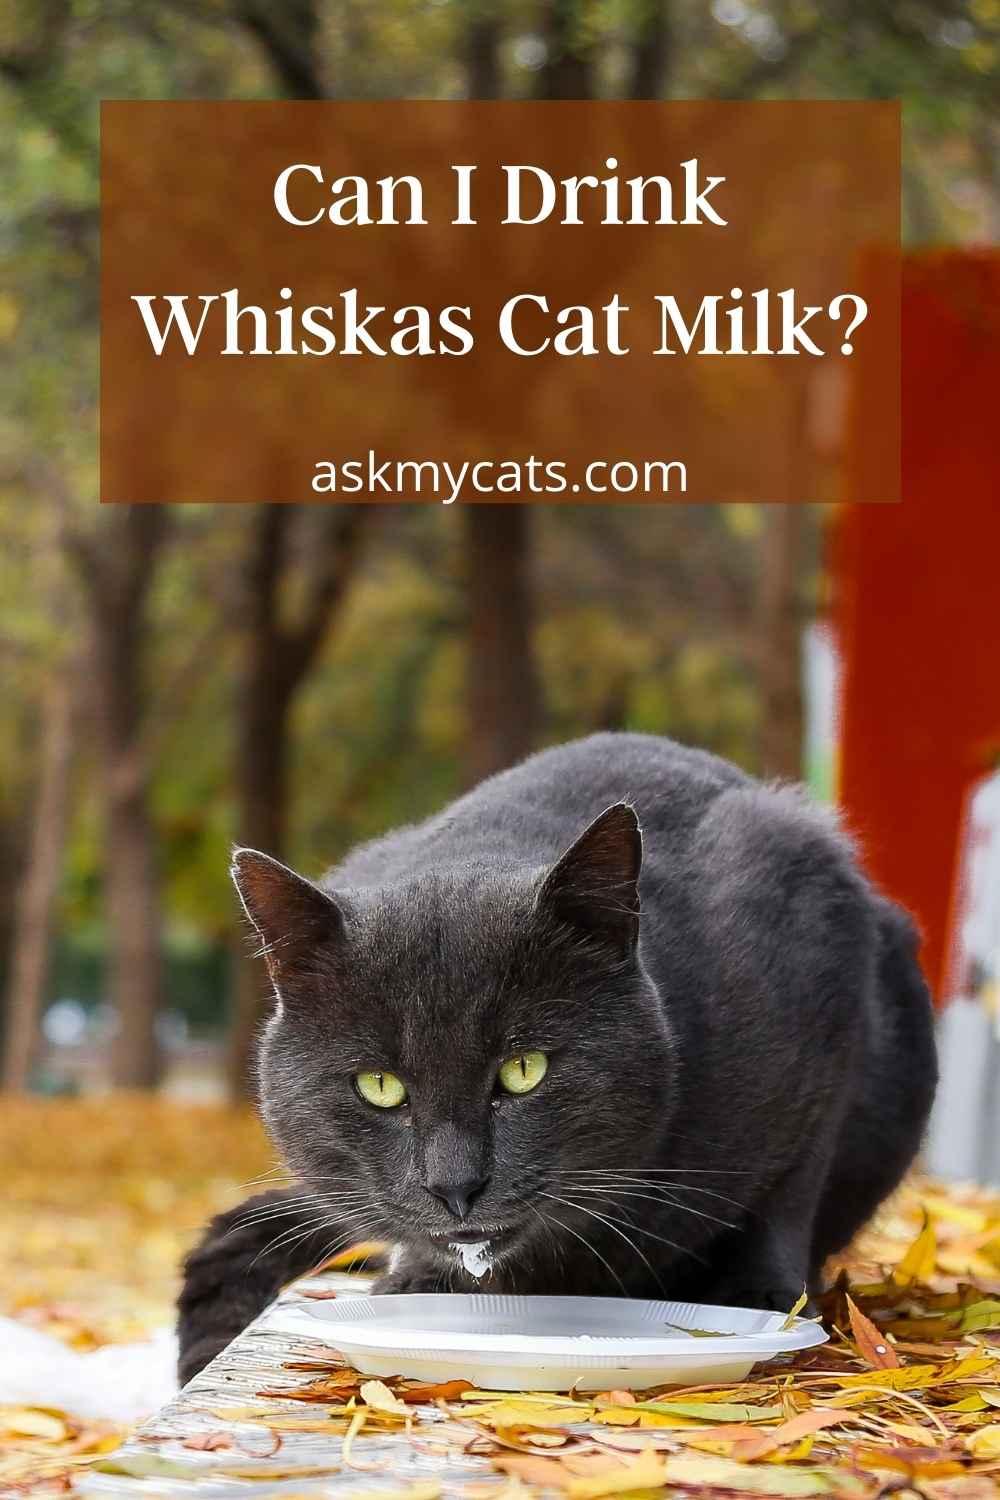 Can Humans Drink Cat Milk? Read This Before Spitting It Out!